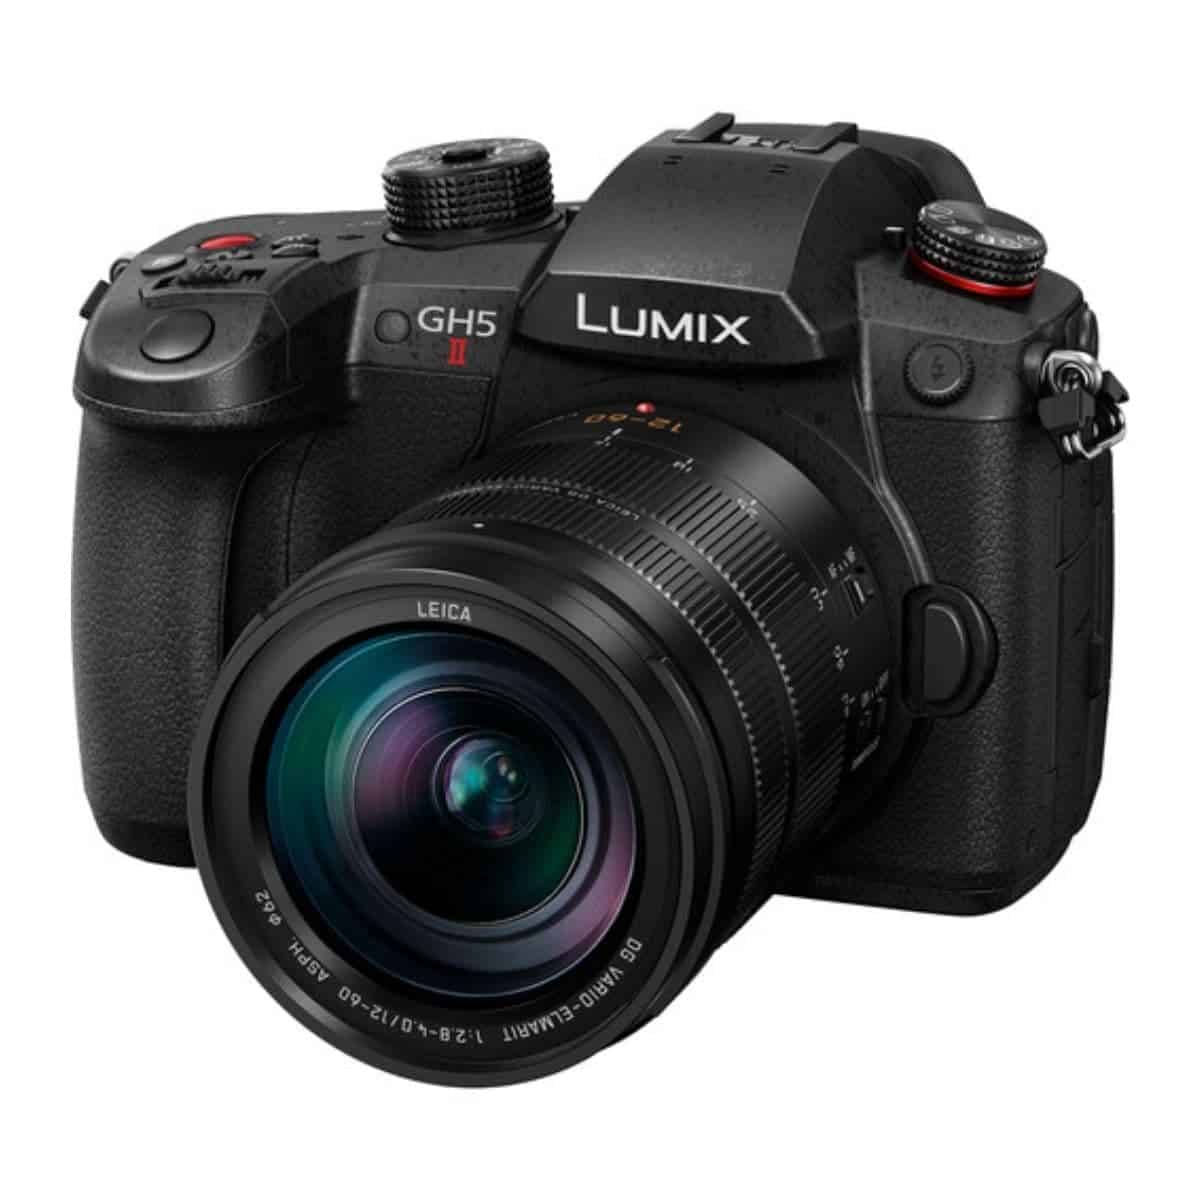 Panasonic Lumix GH5 II camera with a lens attached.